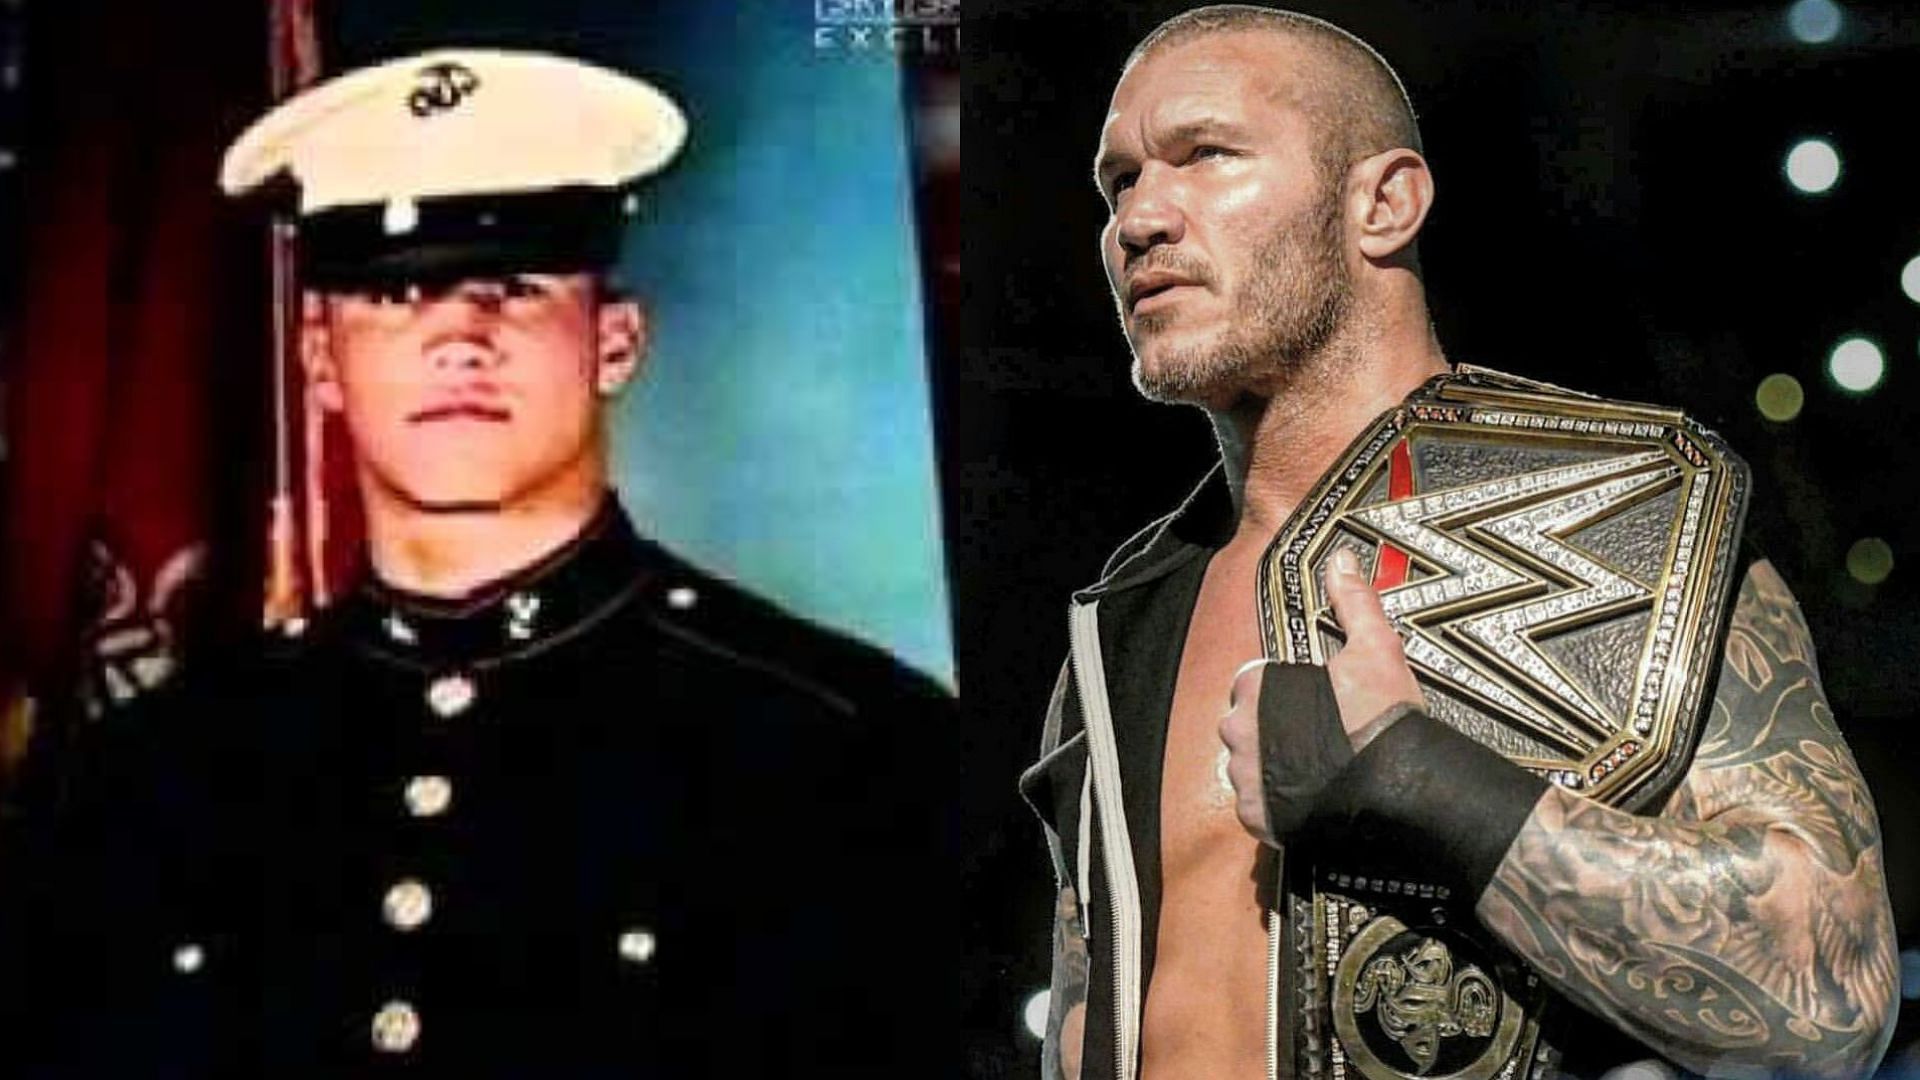 Orton served in the U.S. Marines for one year